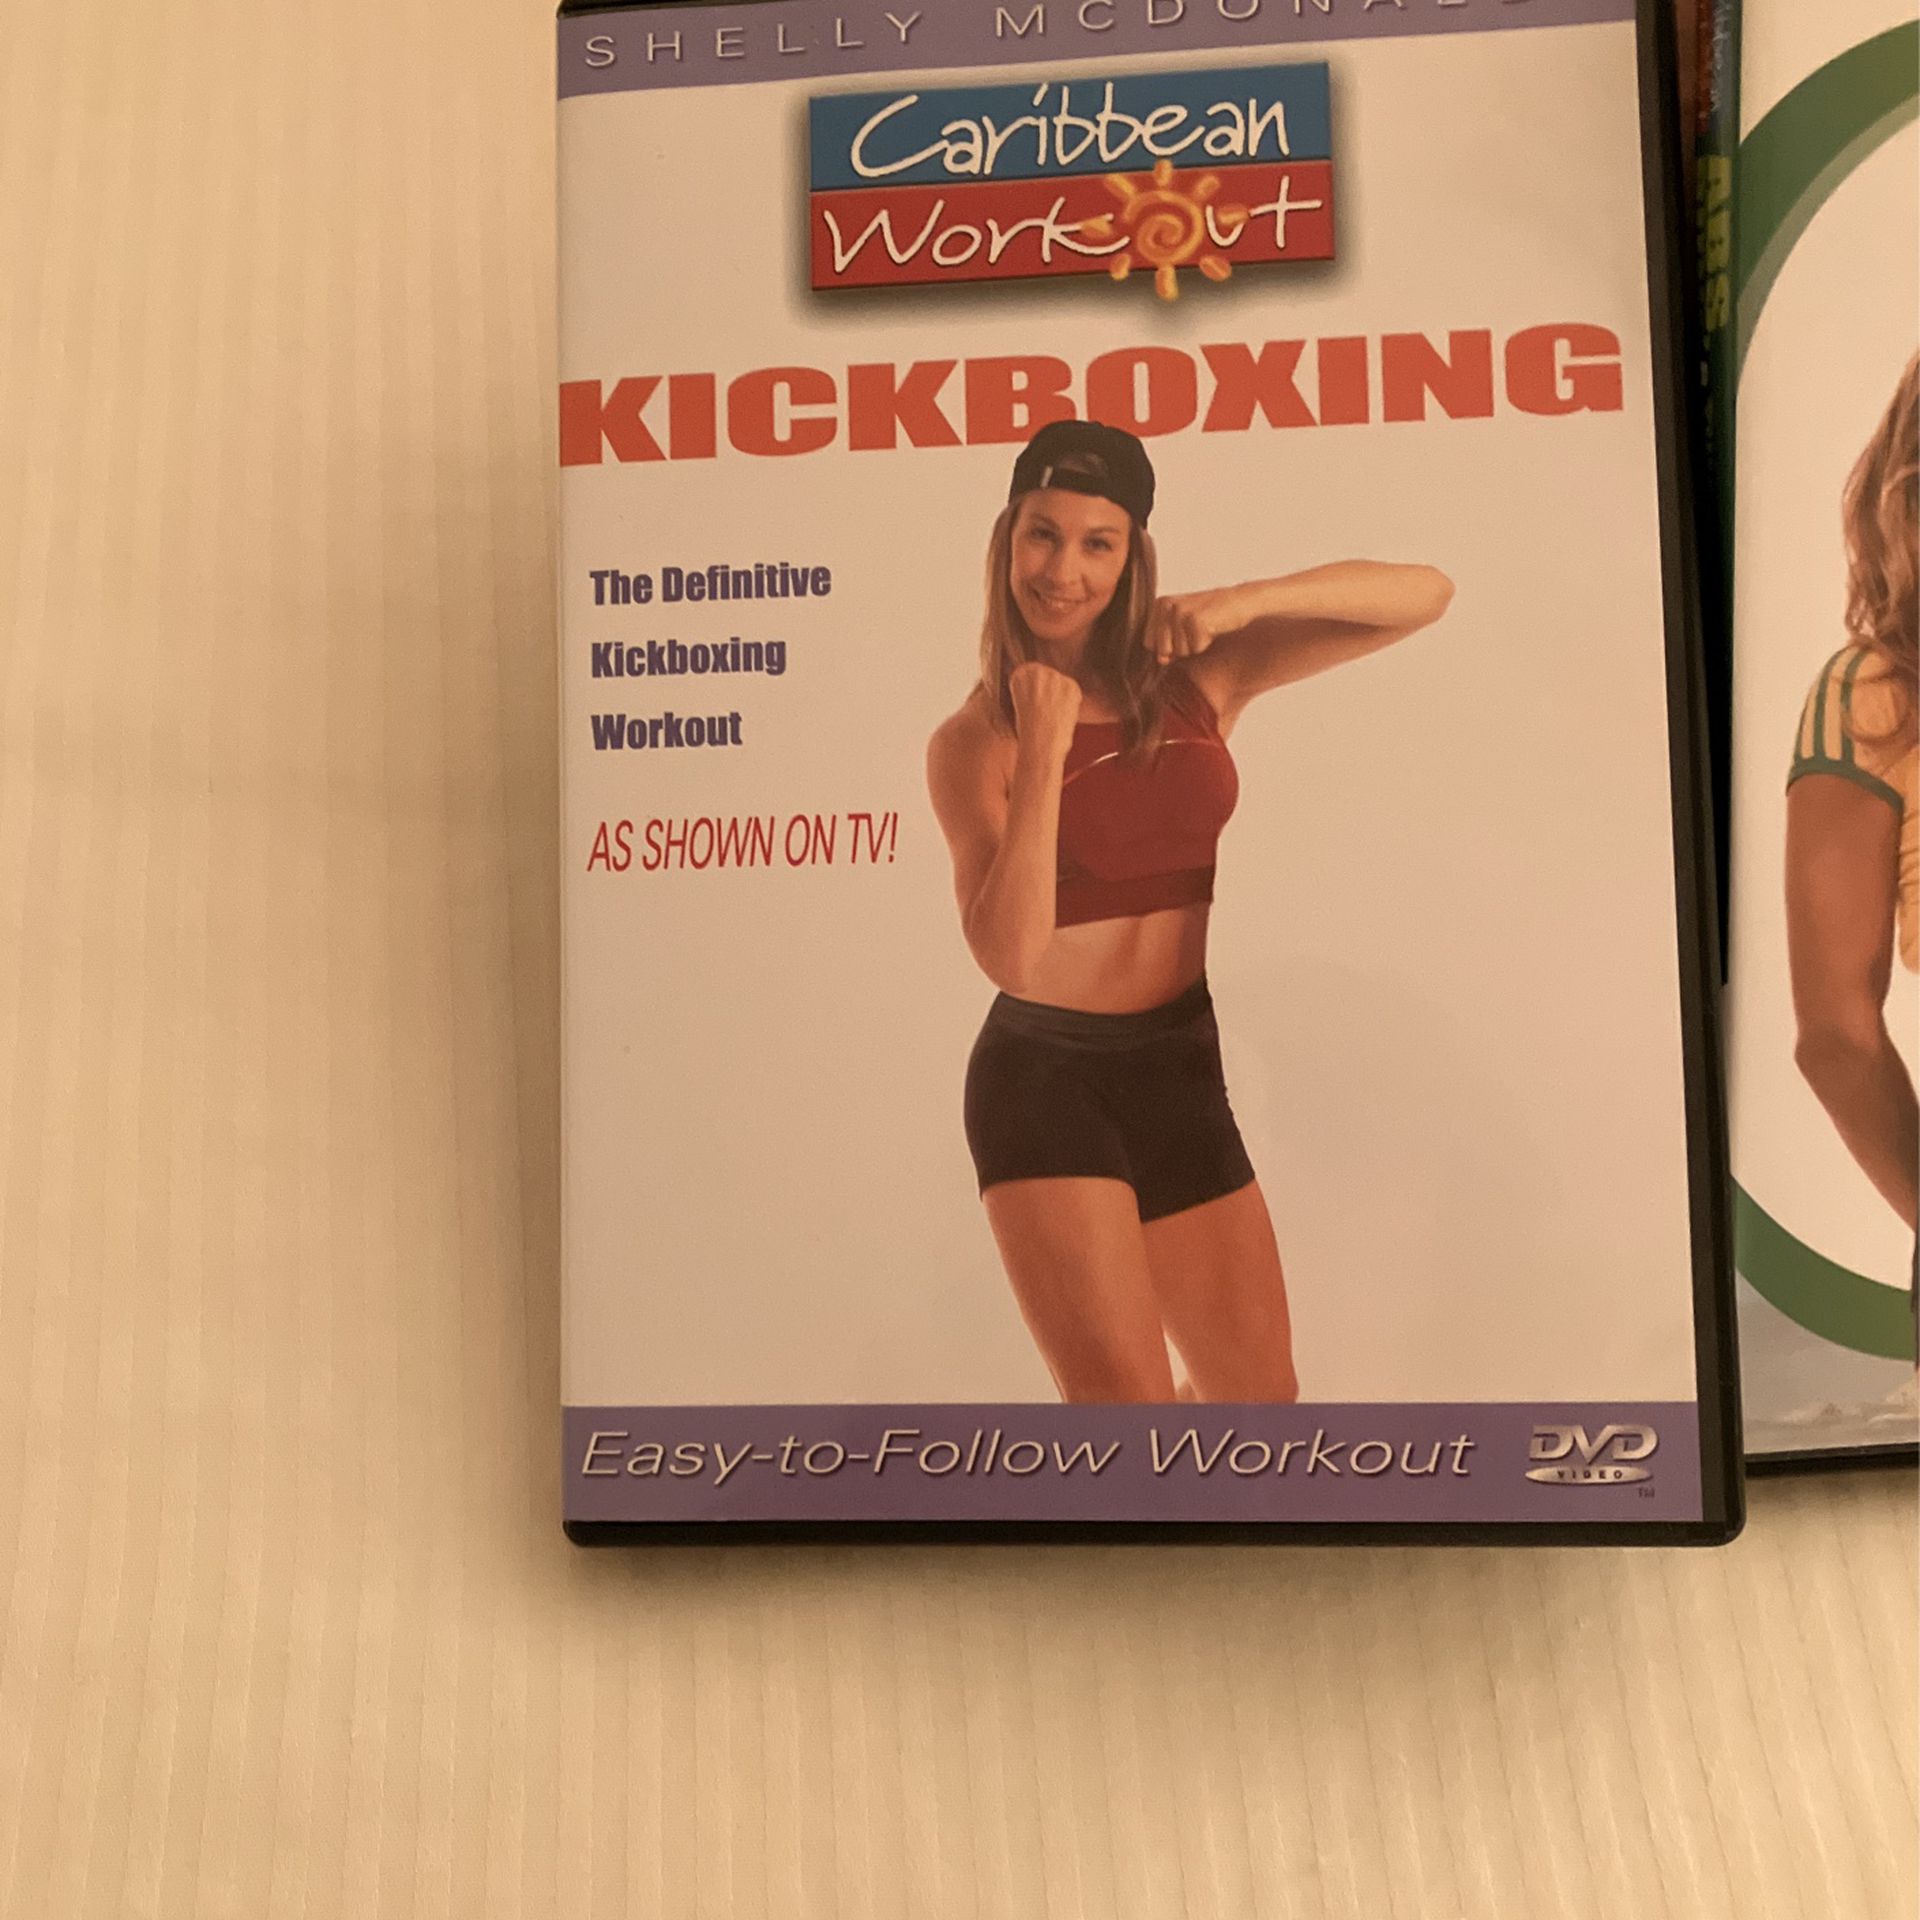 Six Workout Exercise DVDs, Caribbean Workout With Shelley Mcdonald